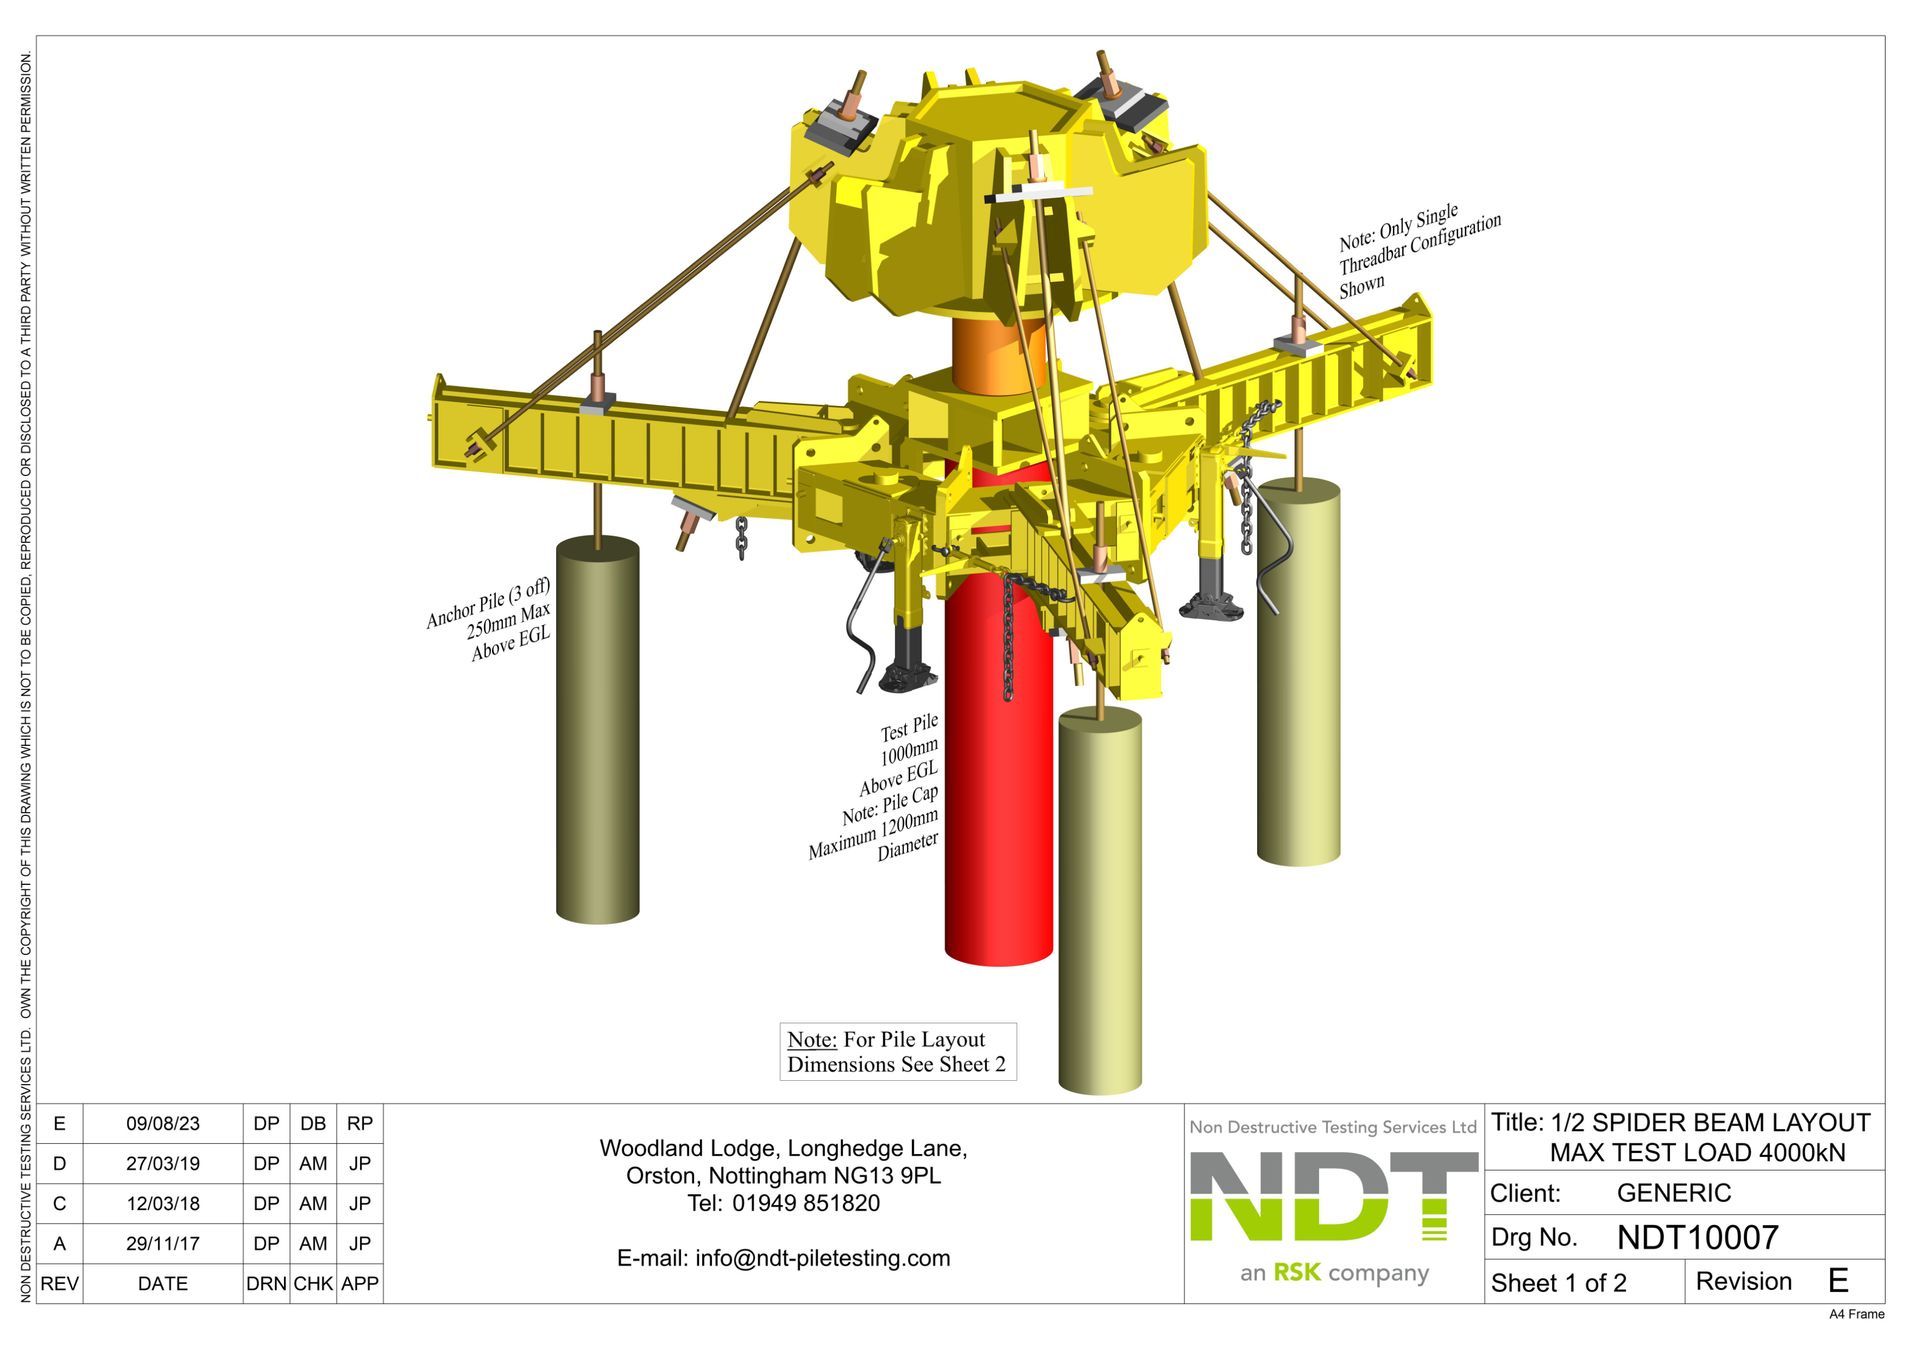 NDT1004 Spider Beam Pile Positions (10000kN)